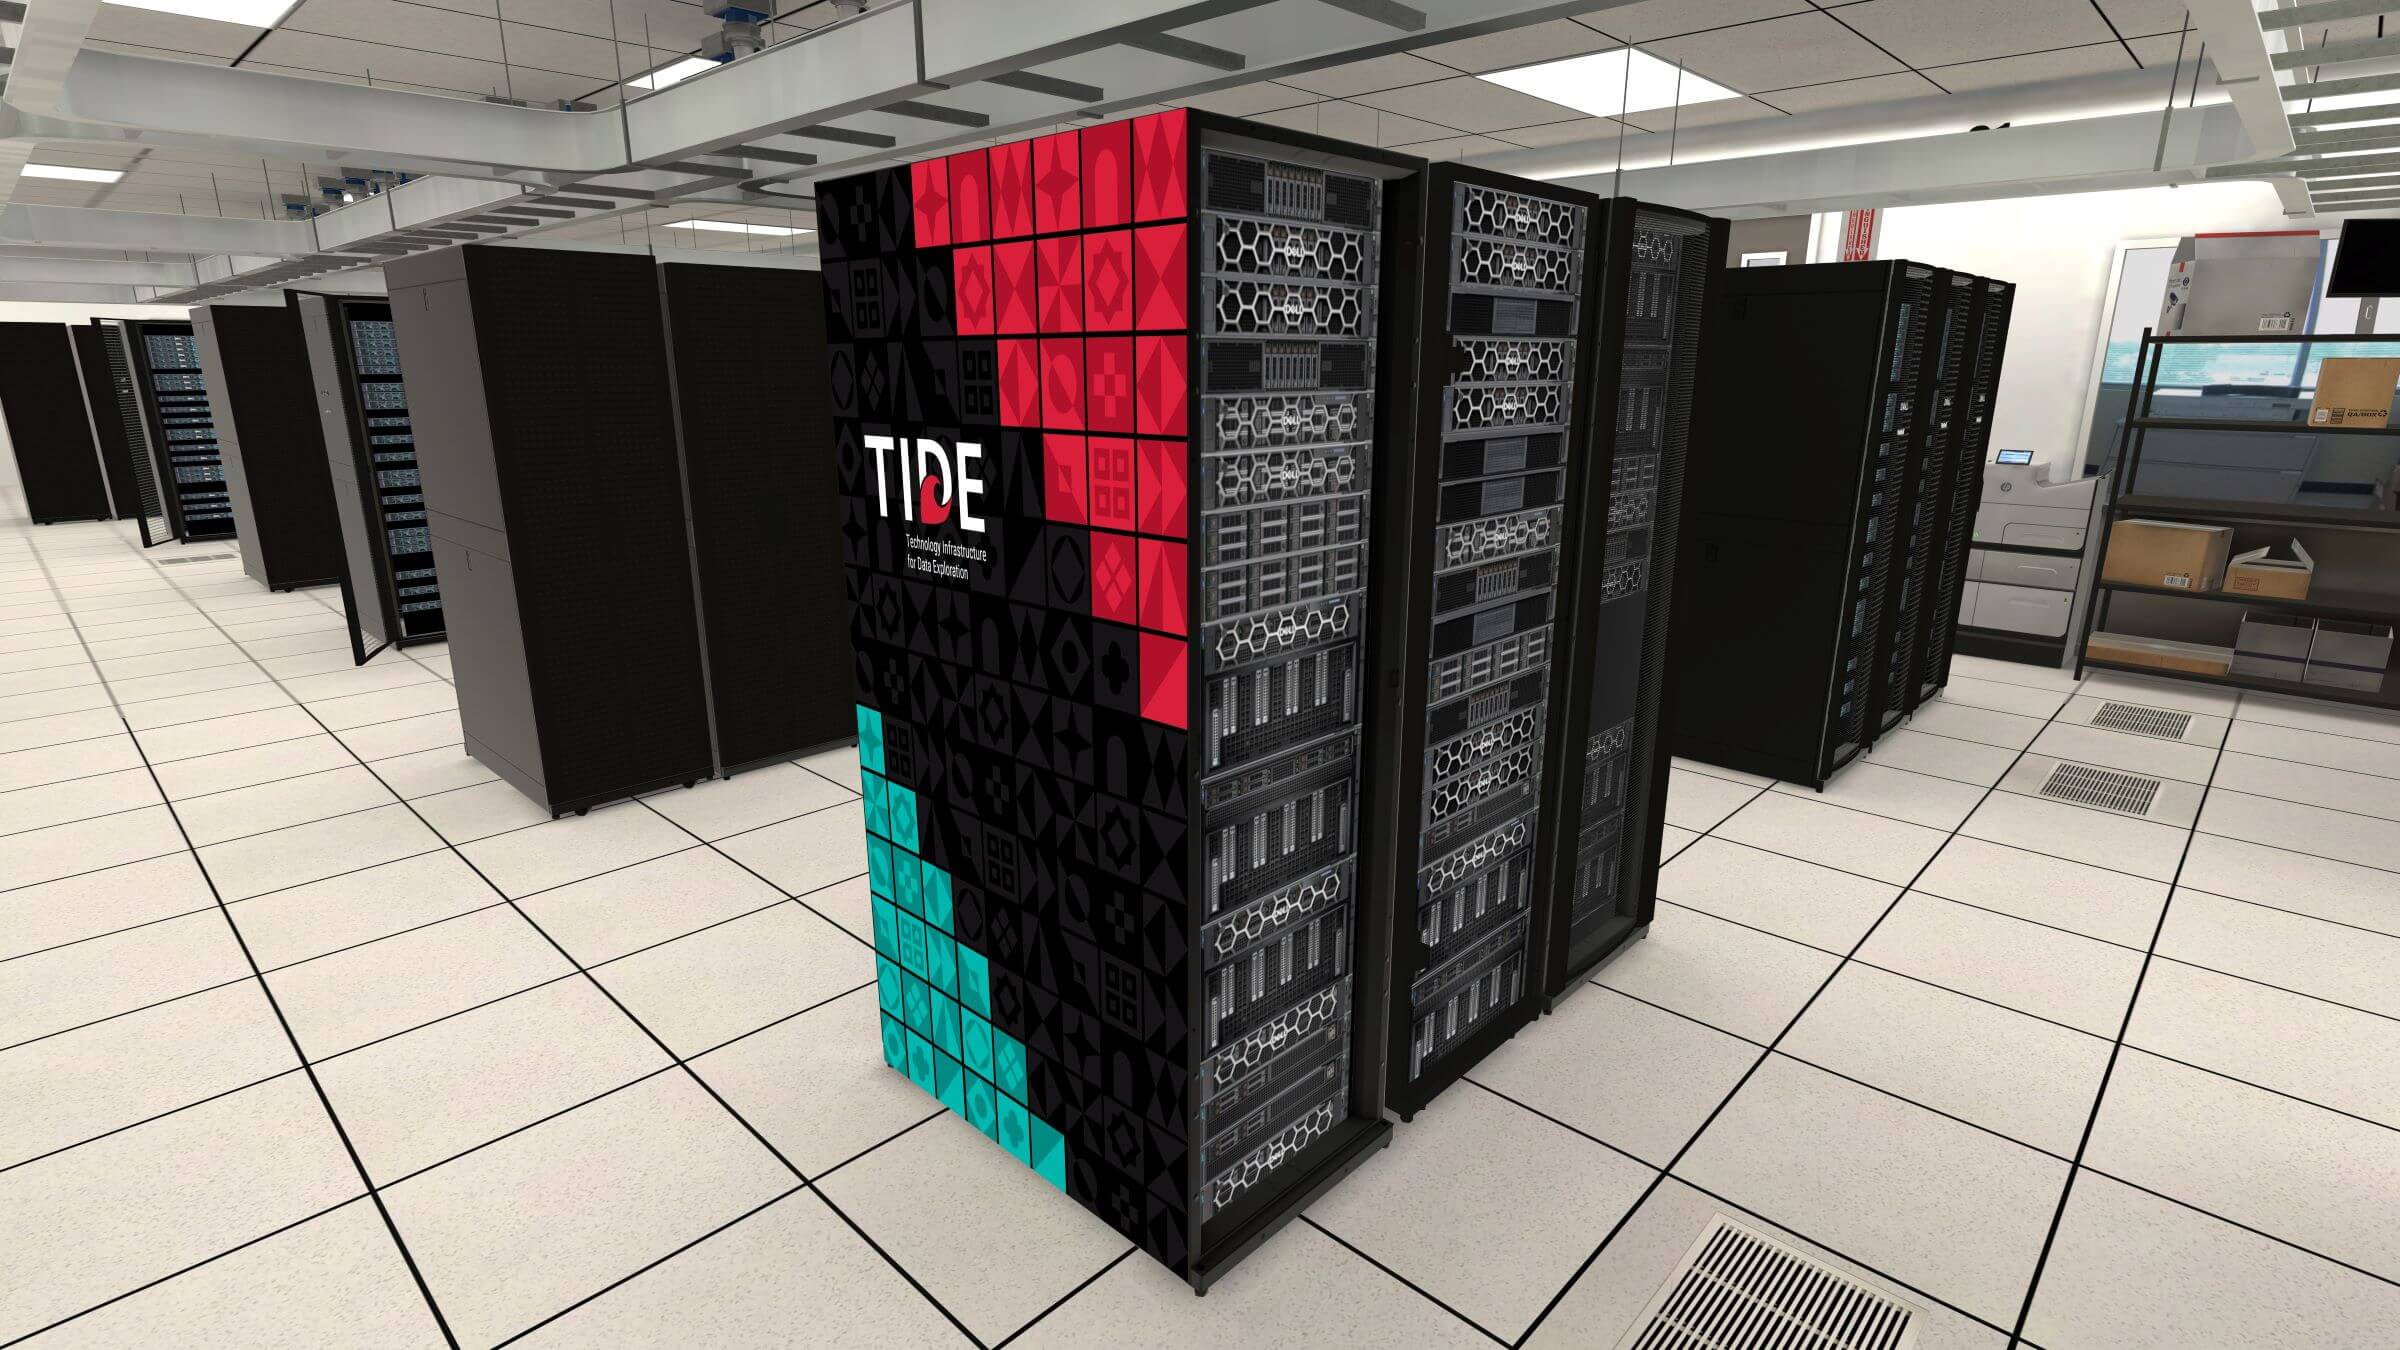 rendered image of servers with TIDE logo